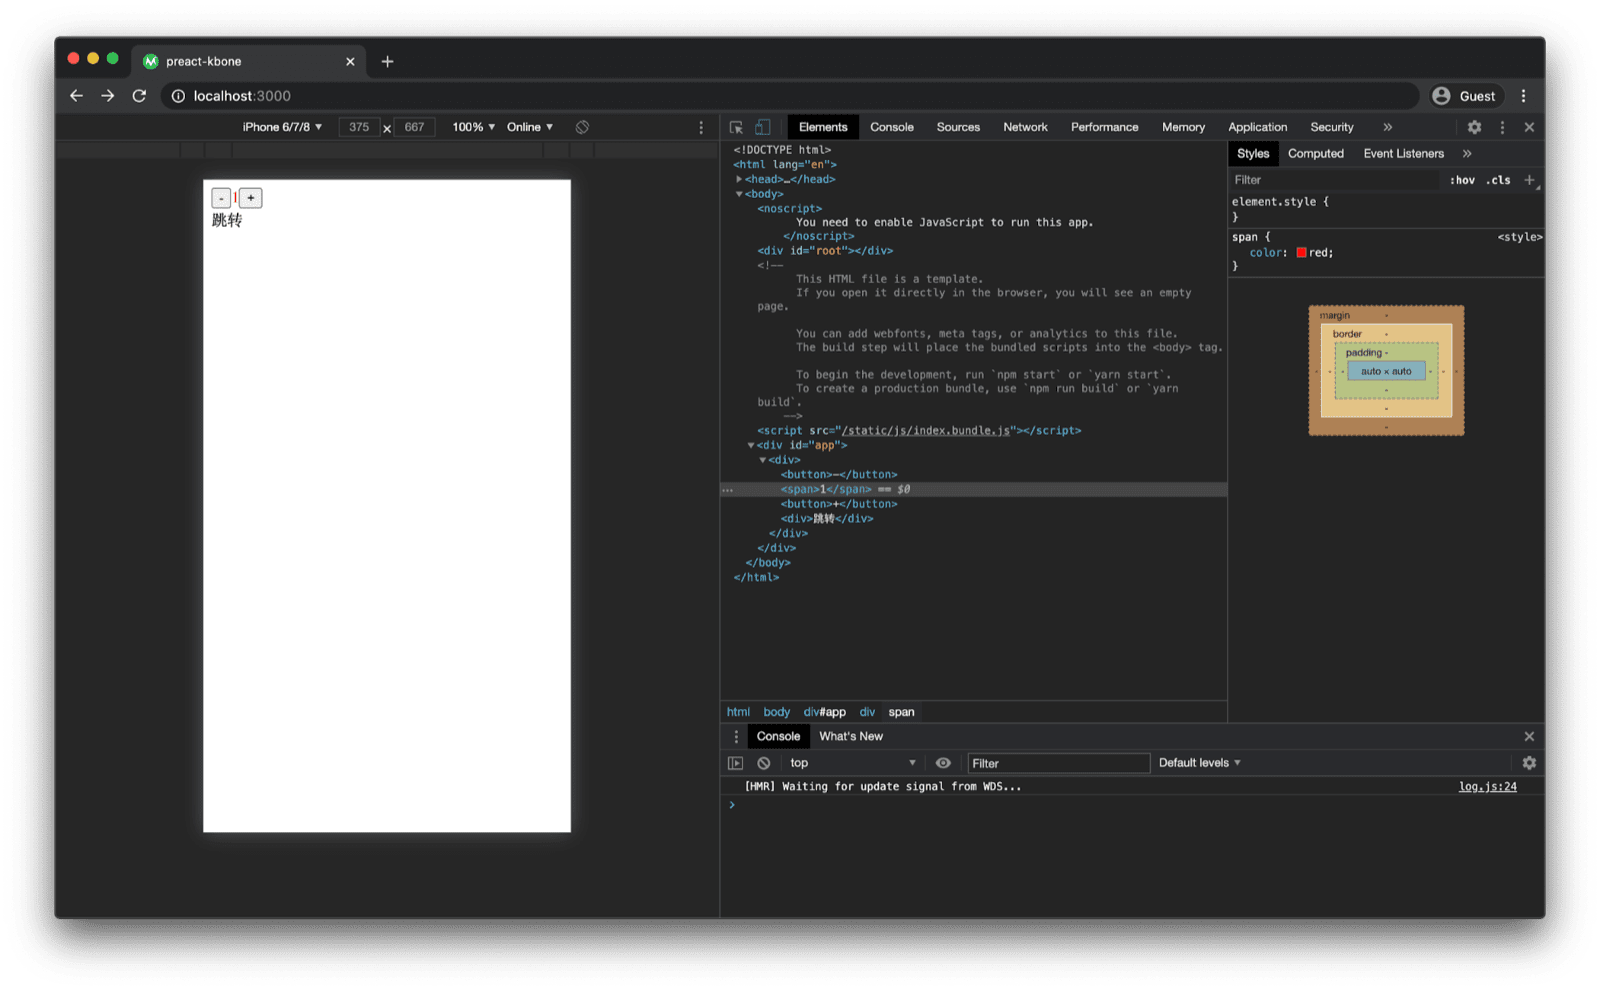 The Preact kbone template demo app opened in the web browser. Inspecting the DOM structure shows the to-be-expected markup based on the Preact component code.